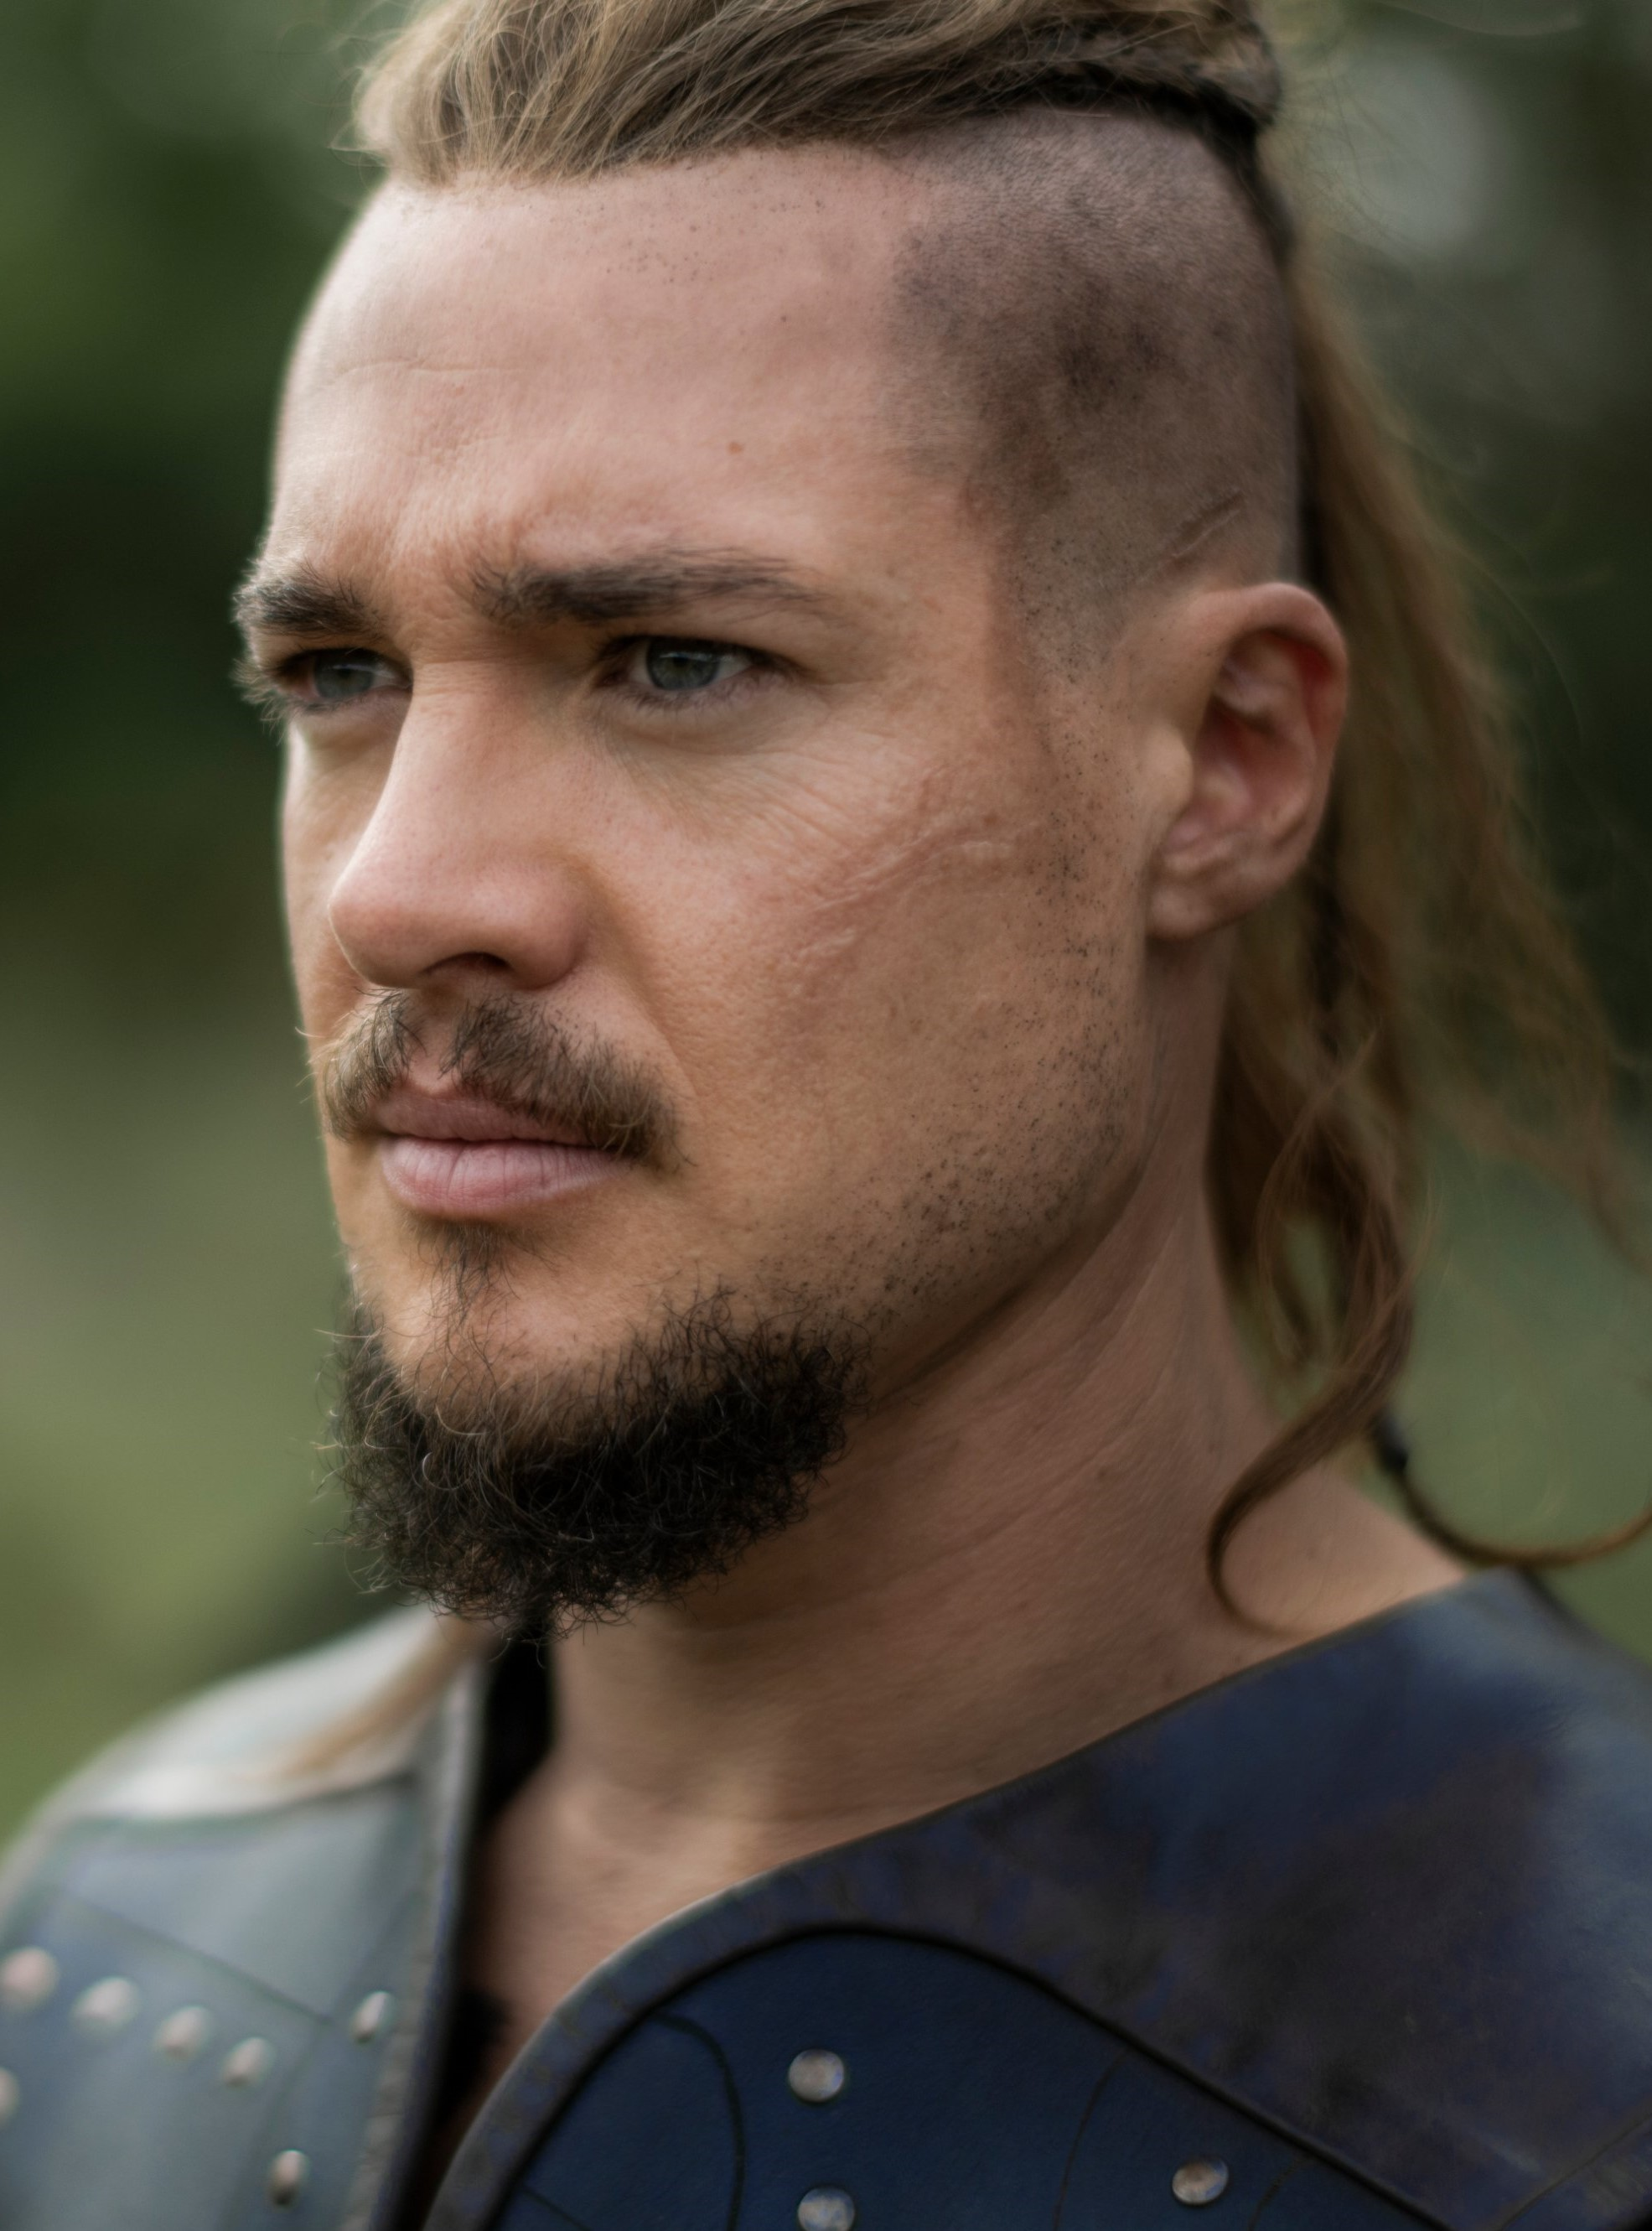 Uhtred the Bold  Every Woman Dreams